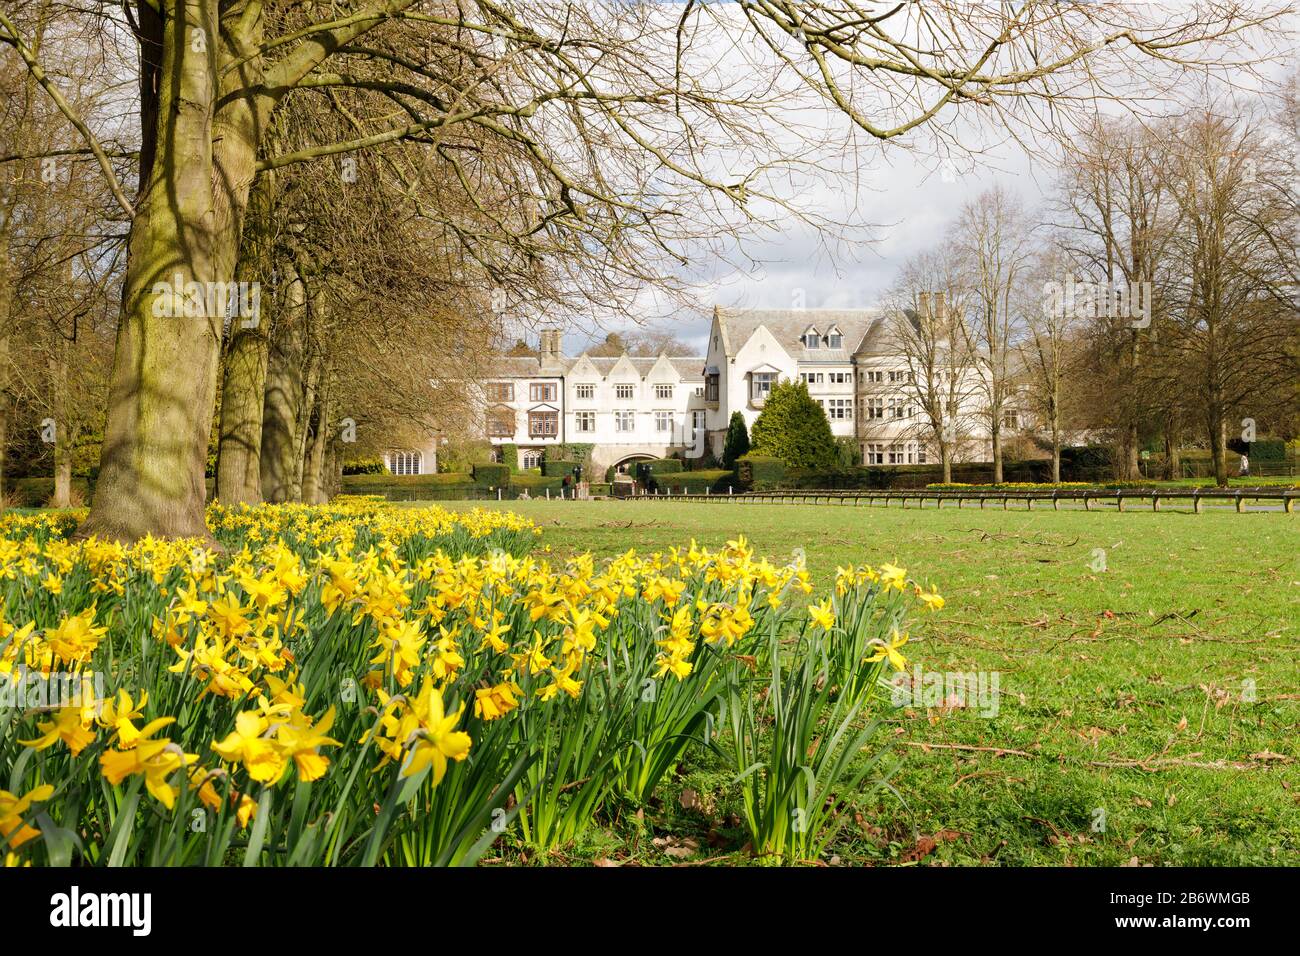 Binley, Warwickshire, March 2020: Daffodils surround the trees in the avenue leading to Coombe Abbey Hotel, a Grade I listed building. Stock Photo